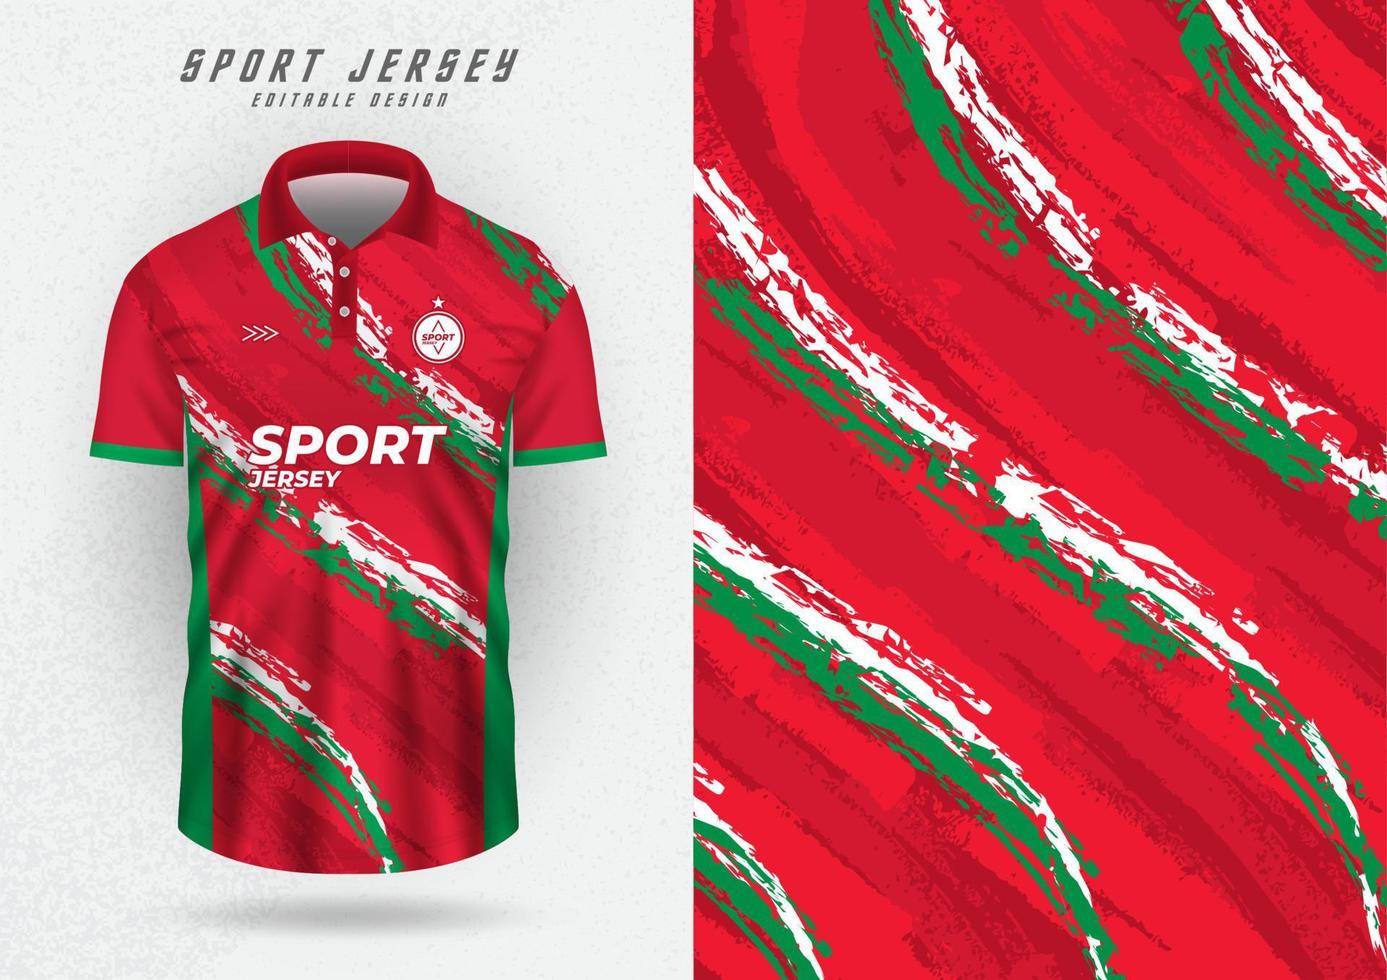 Background Mock up for sport jersey football running racing red green stripes. vector